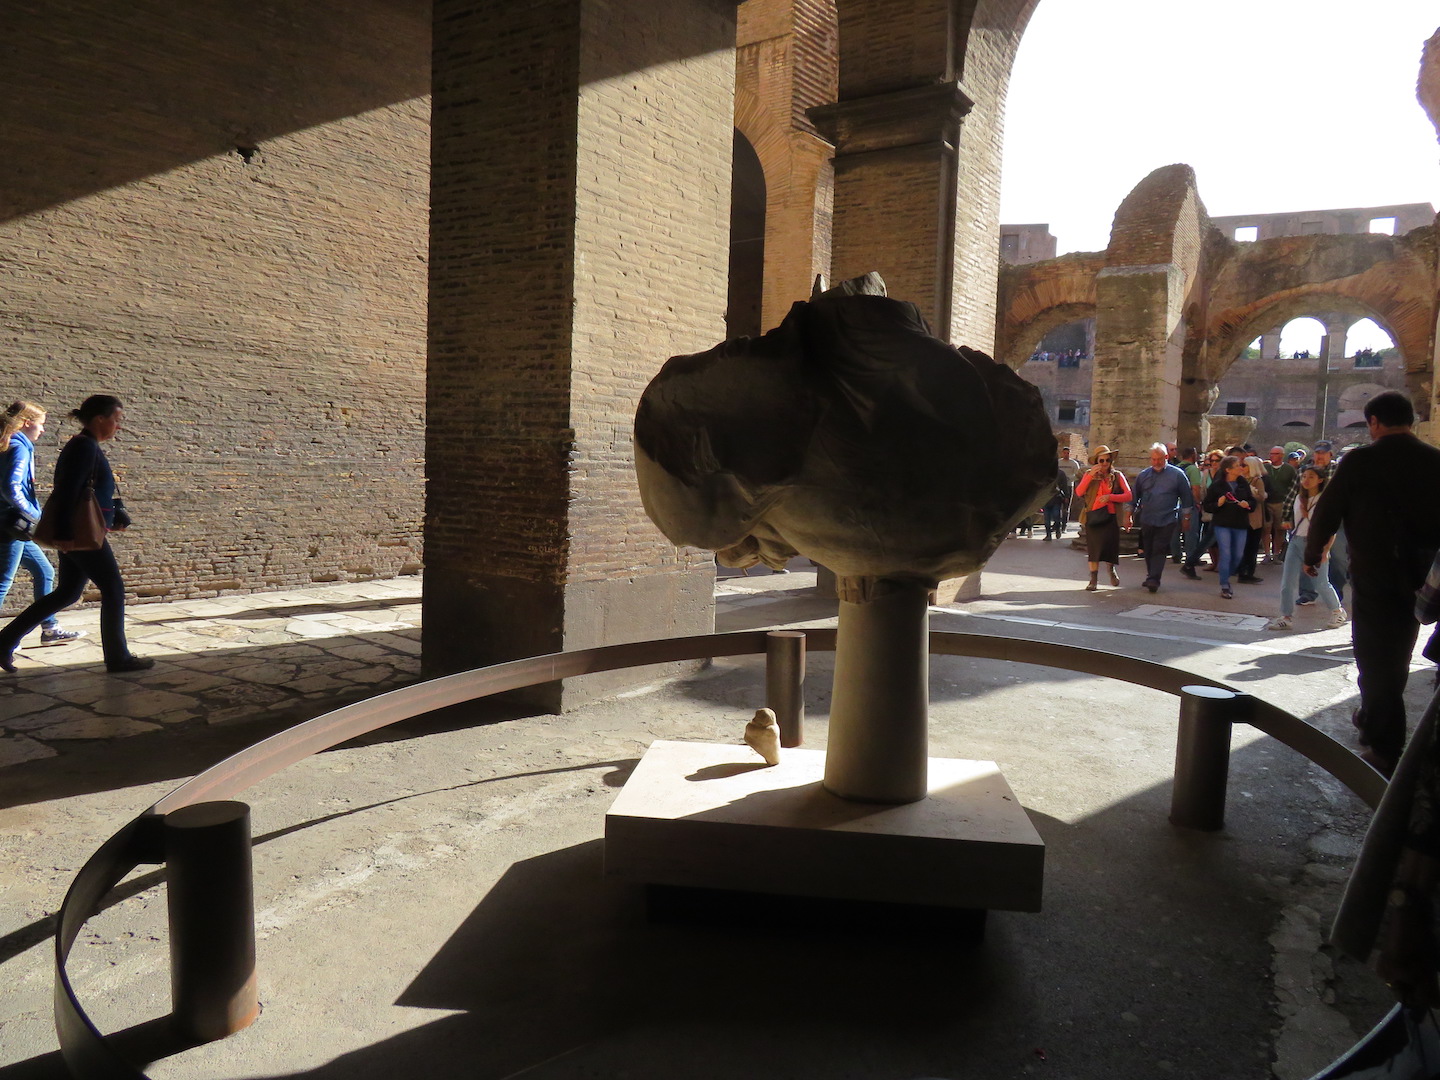 Last sculpture at the Colosseum